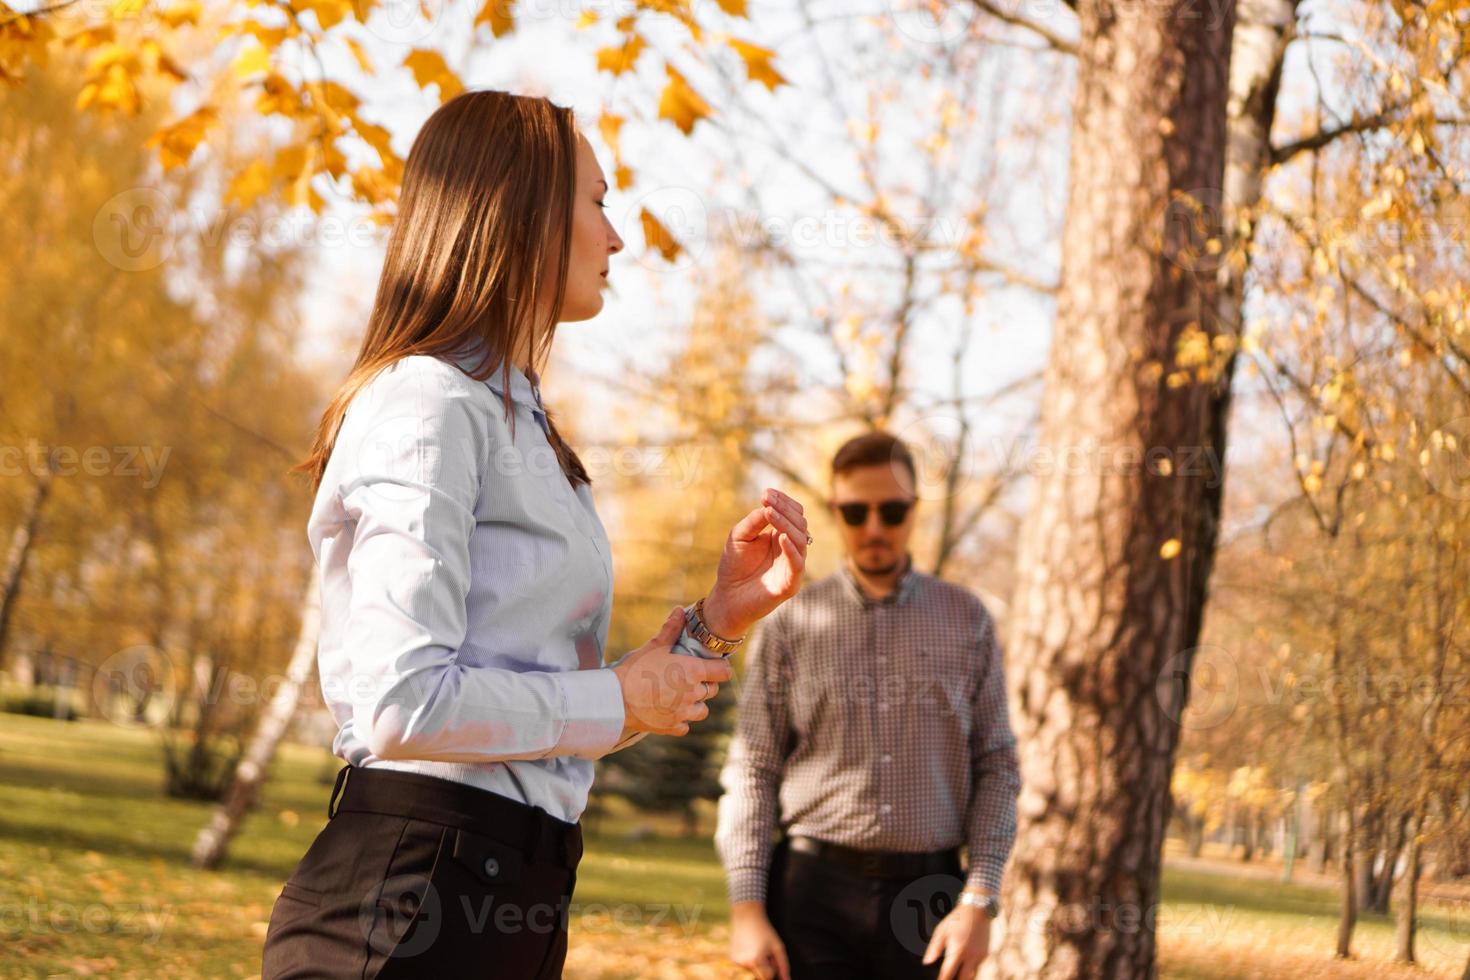 Unknown man in sunglasses watches a woman in park photo